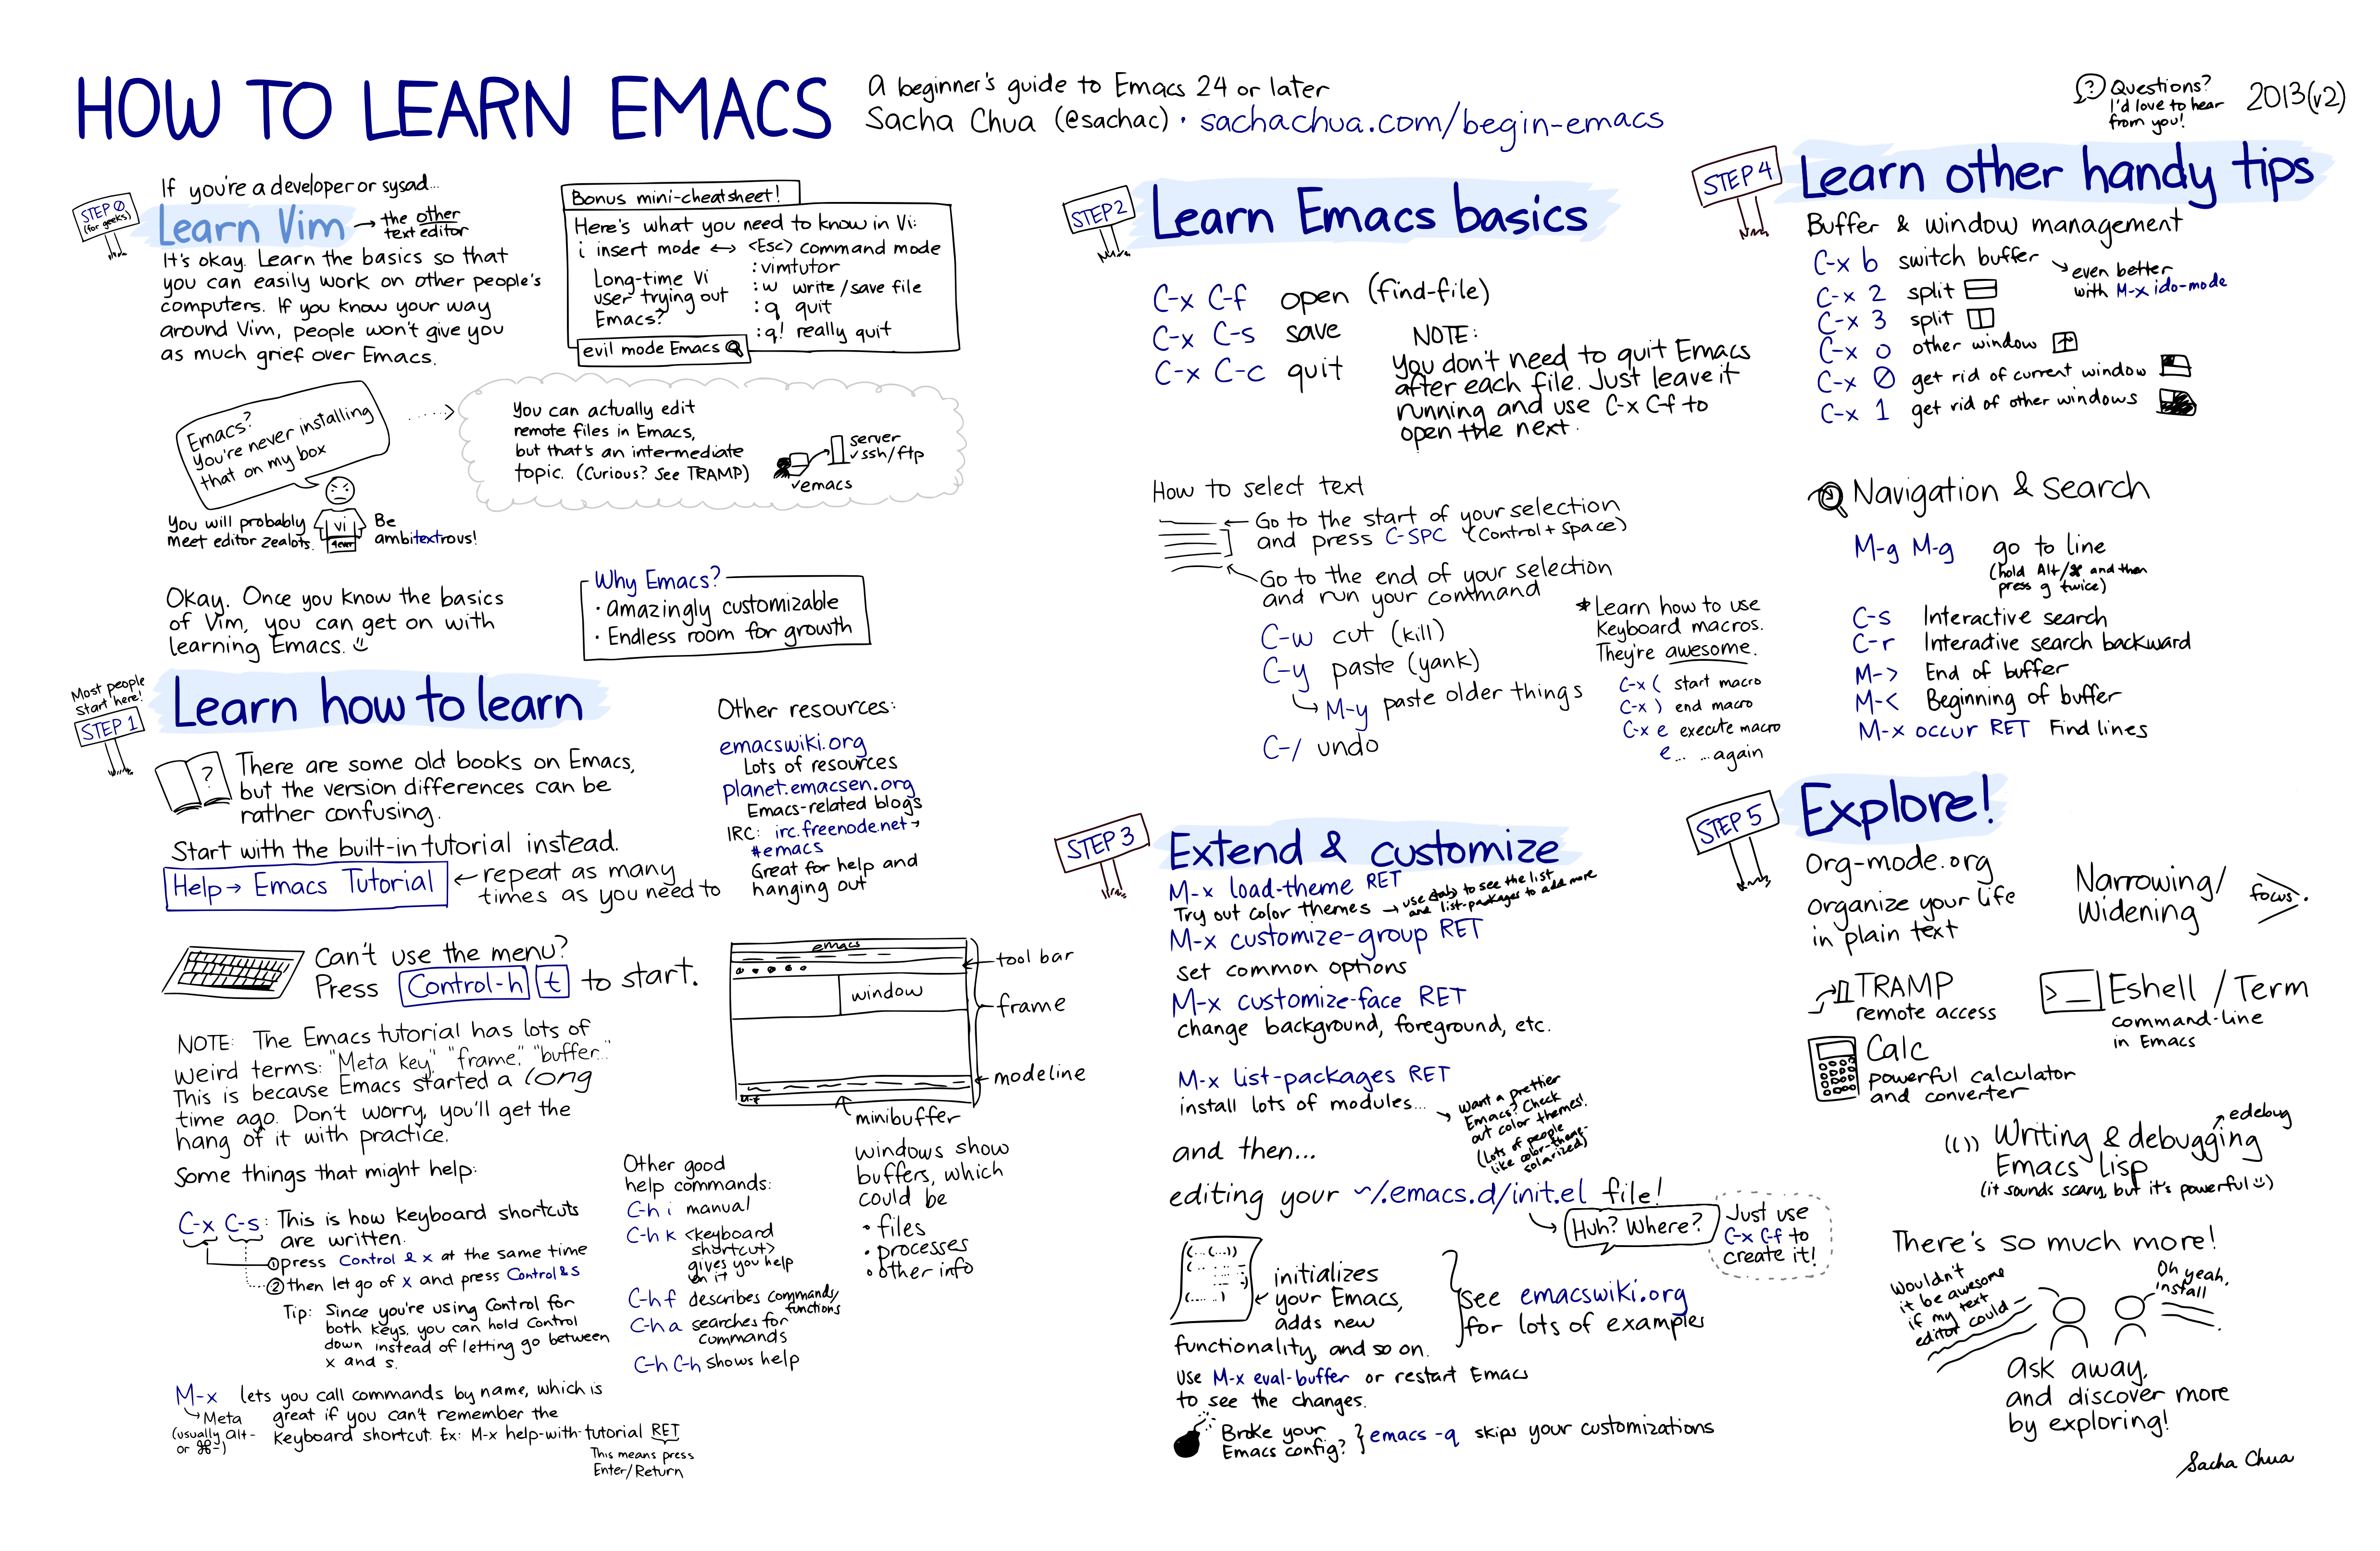 http://emacs.sexy/img/How-to-Learn-Emacs-v2-Large.png